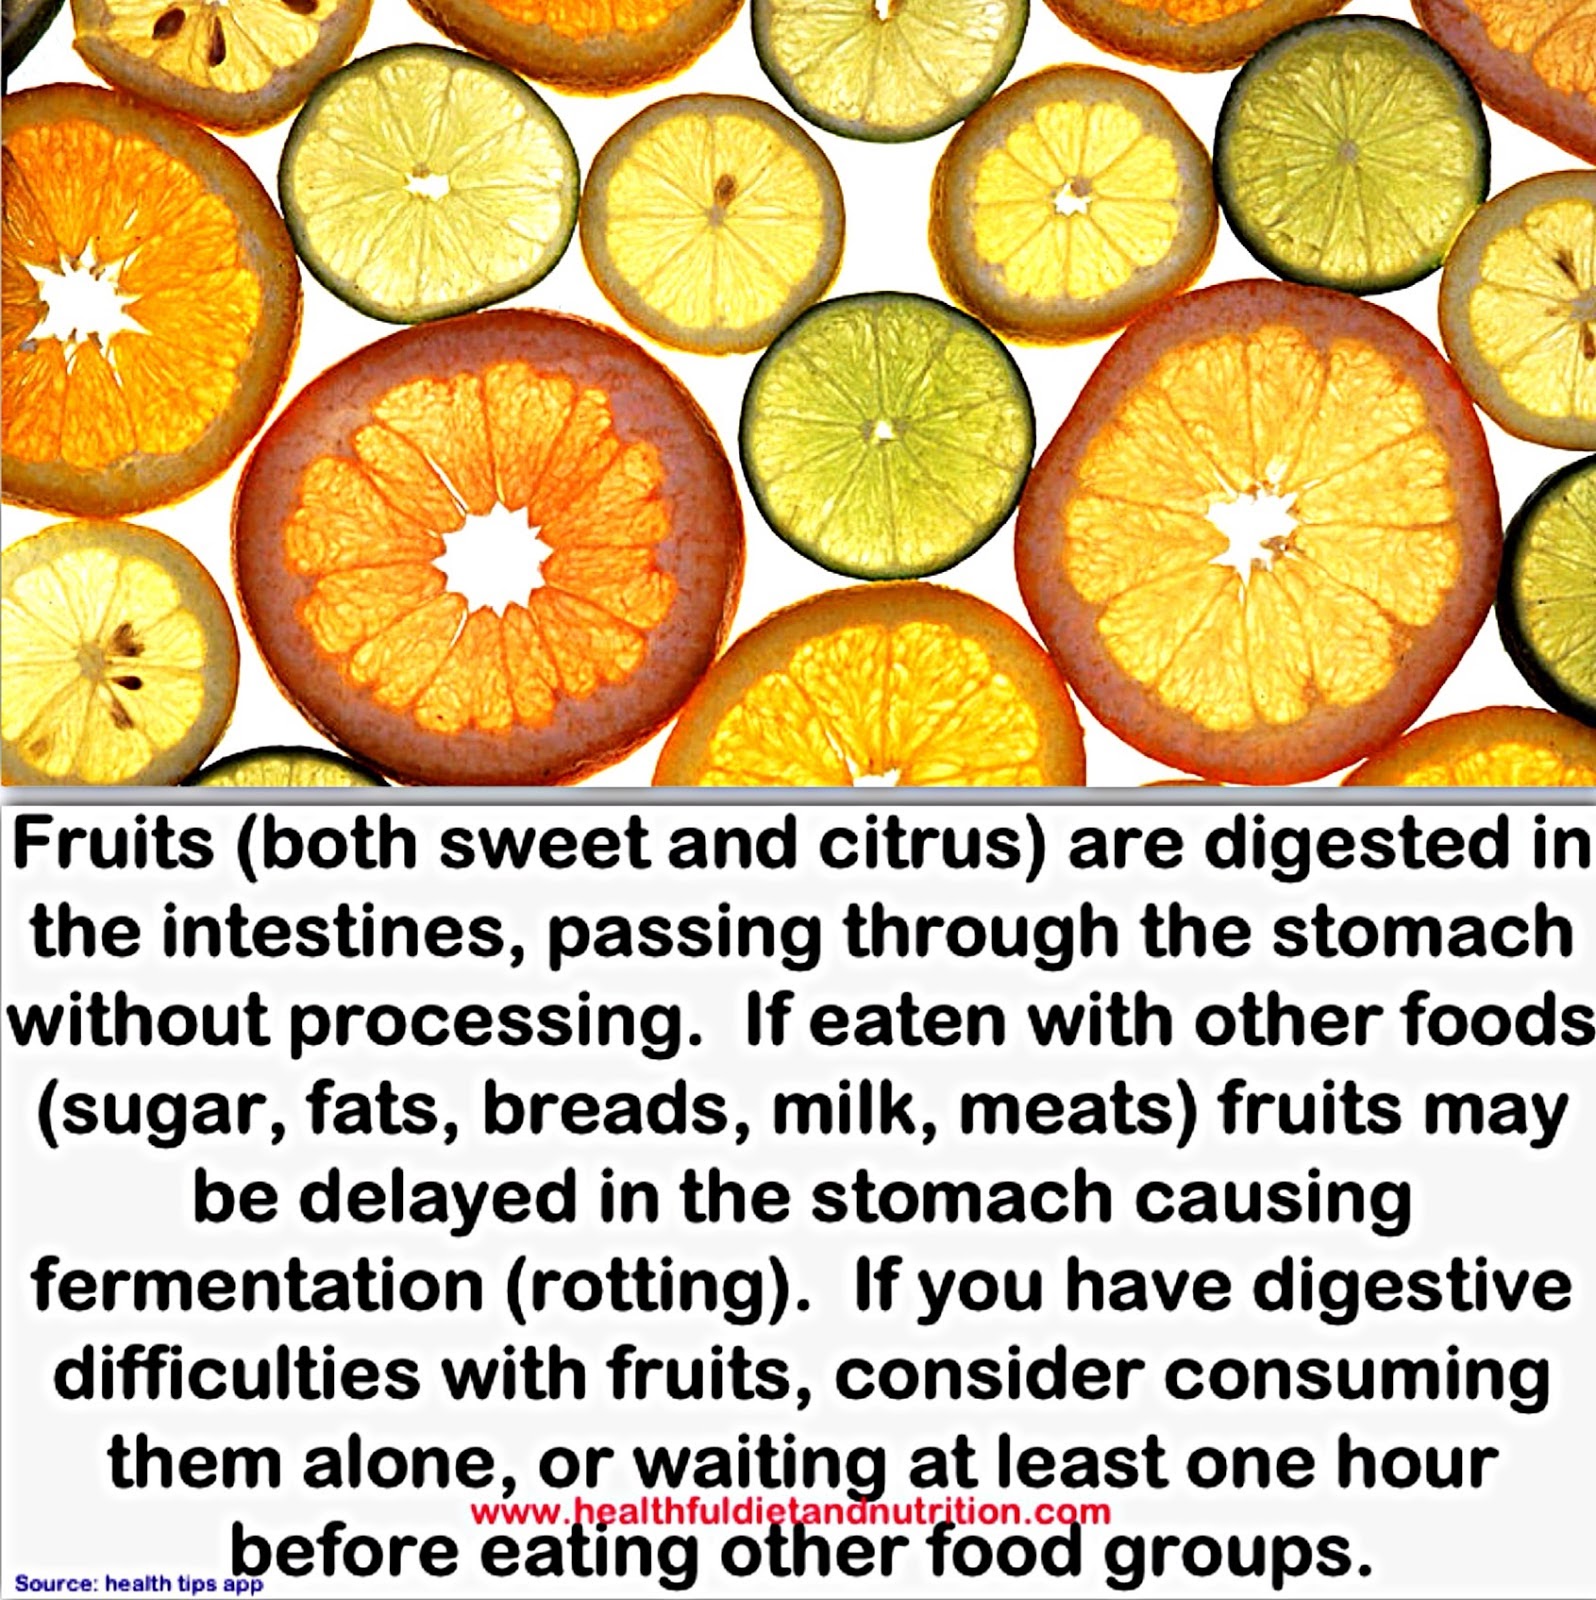 Consume Fruits Alone Or An Hour Before Meal